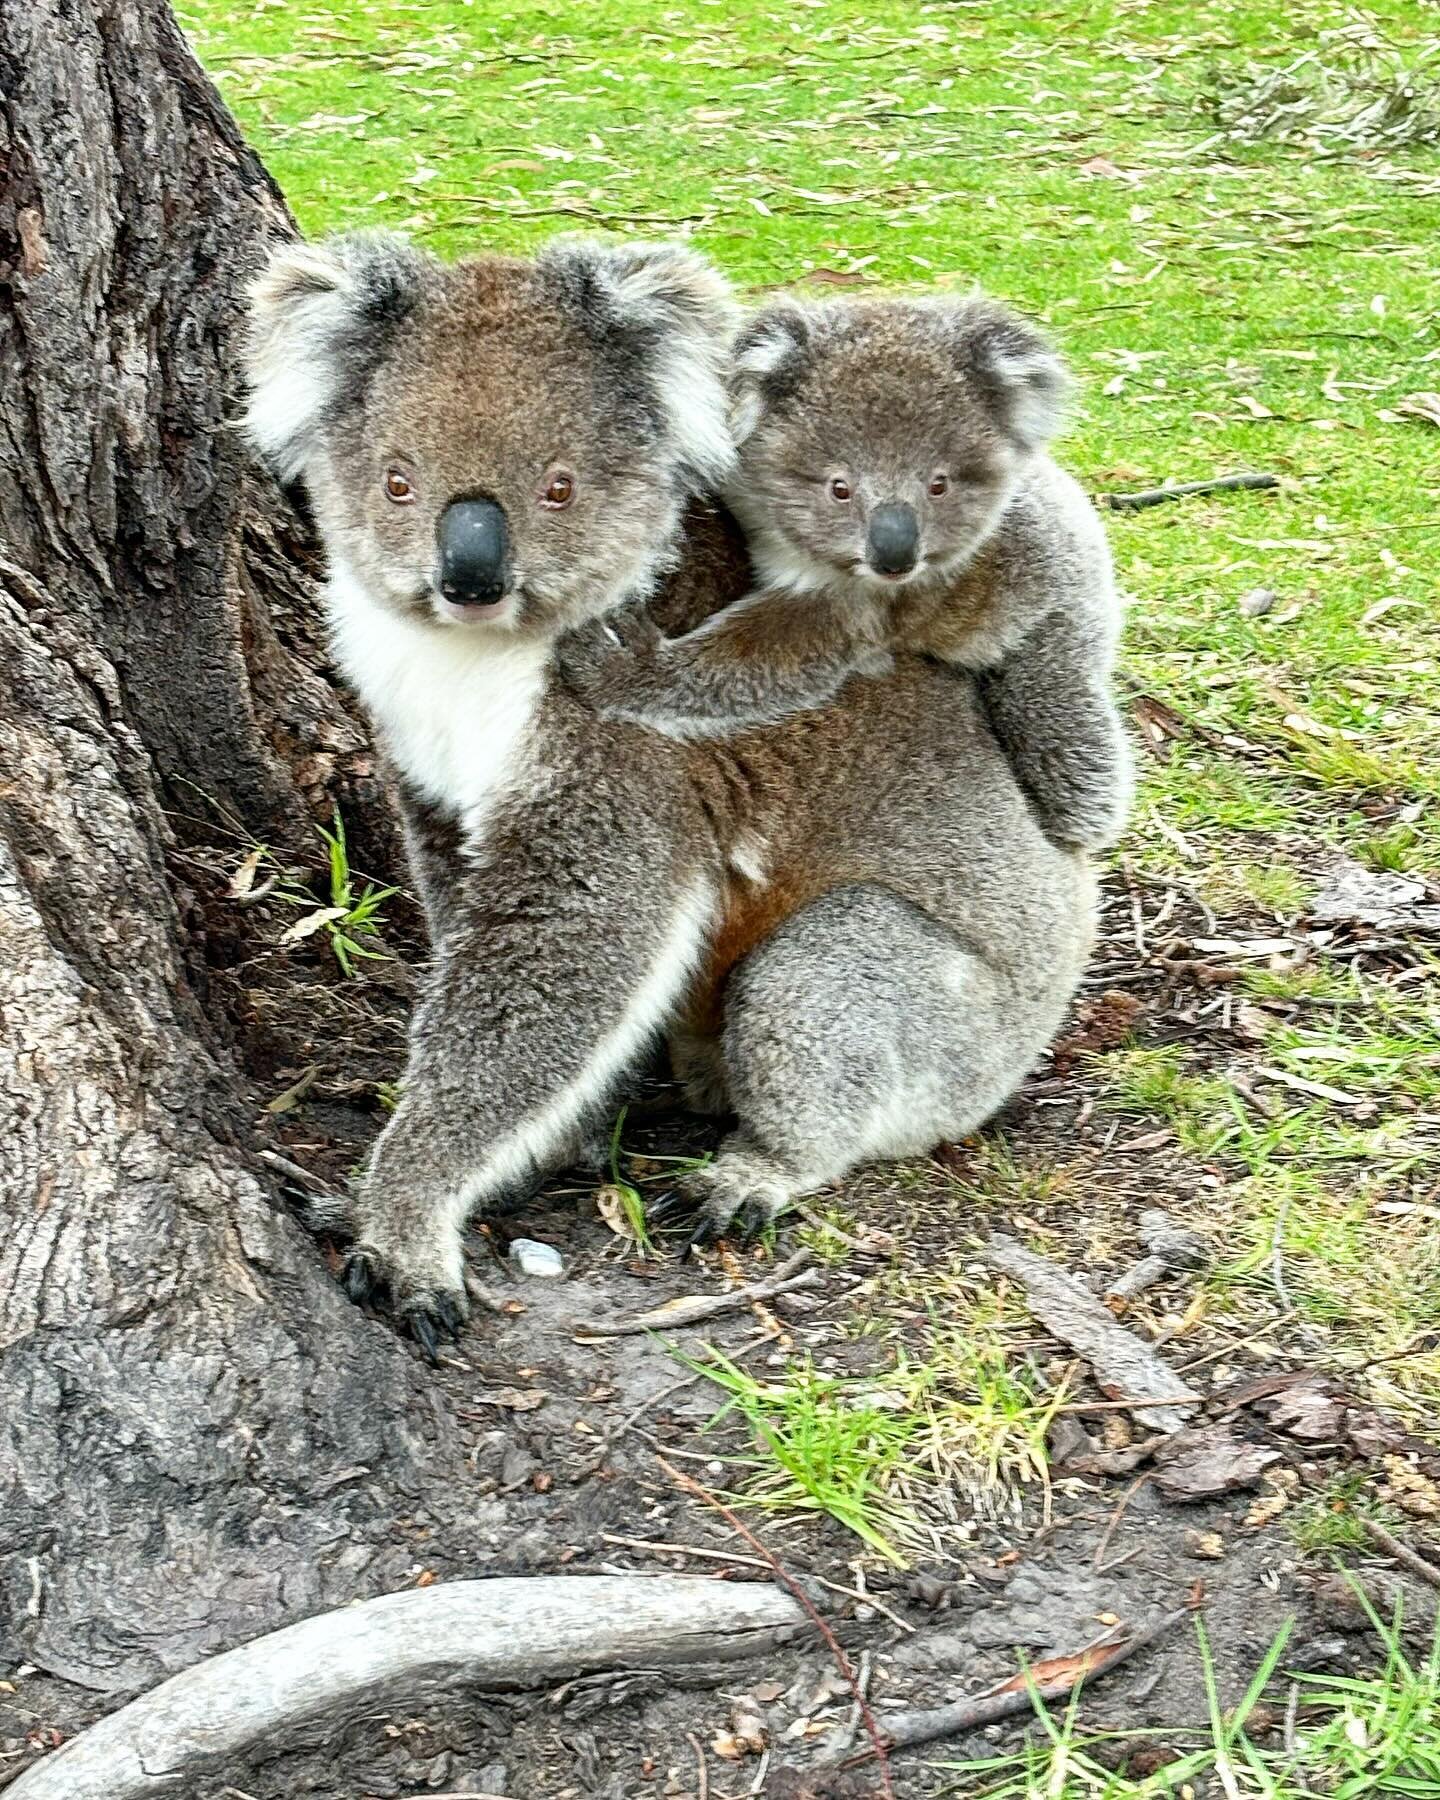 It&rsquo;s nice making new friends but it&rsquo;s even better when they&rsquo;re wild koalas.